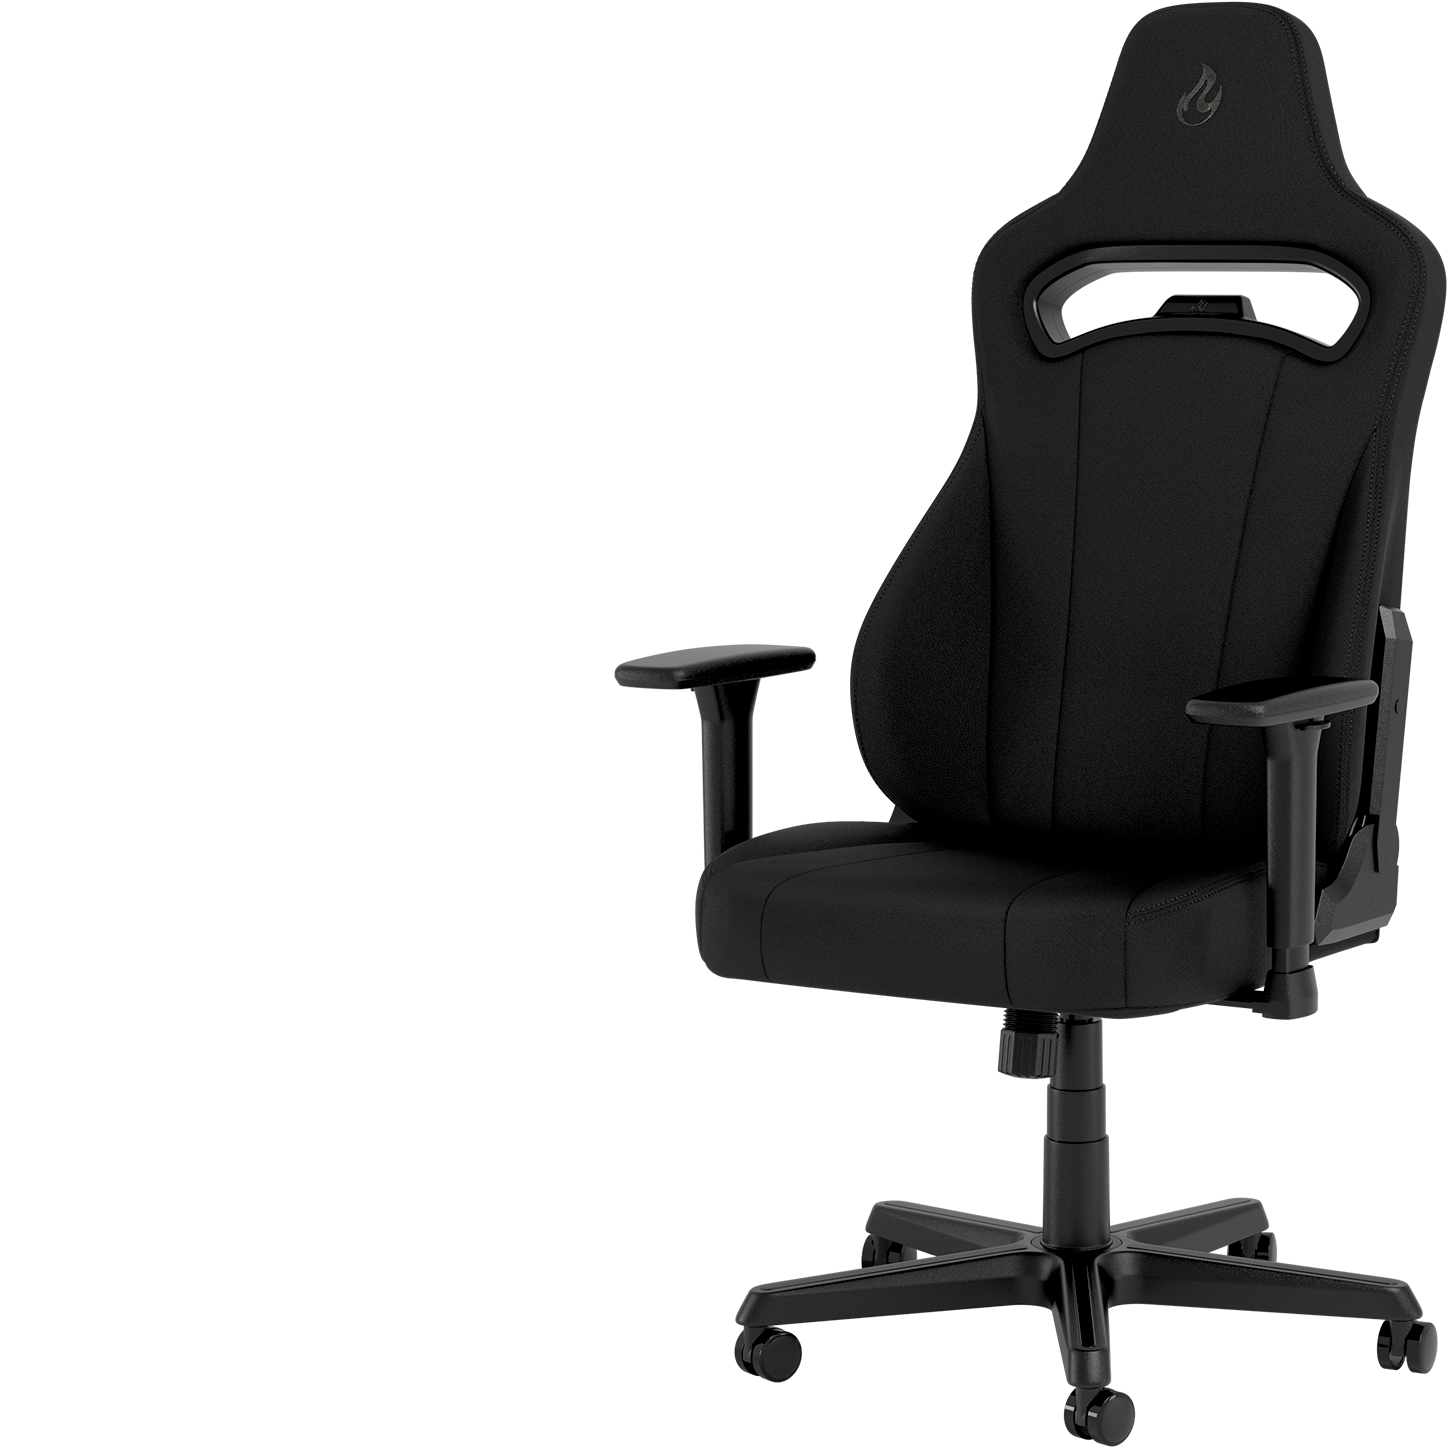 E250 Gaming Chairs